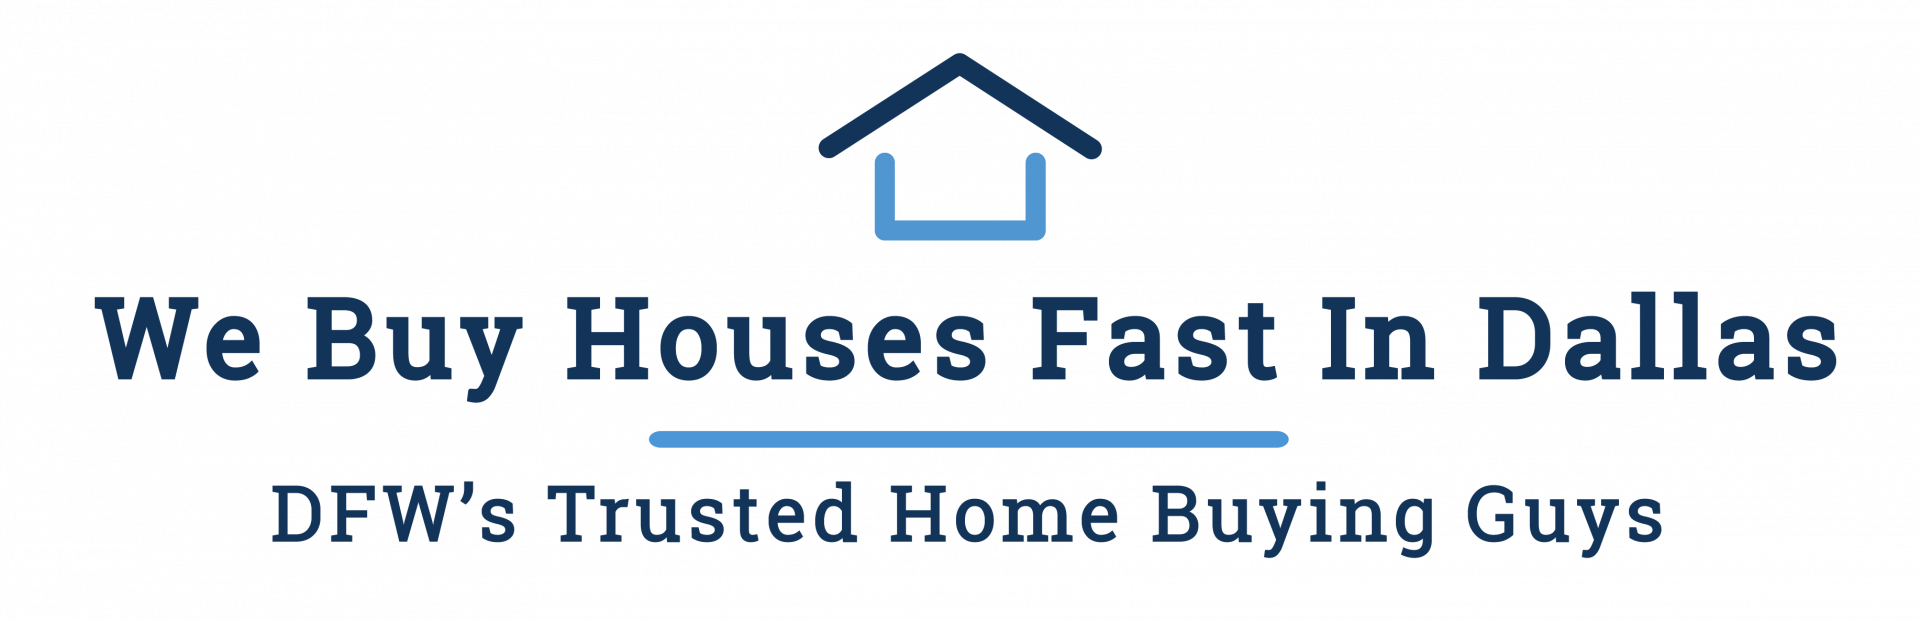 We Buy Houses Fast in Dallas Fort Worth logo